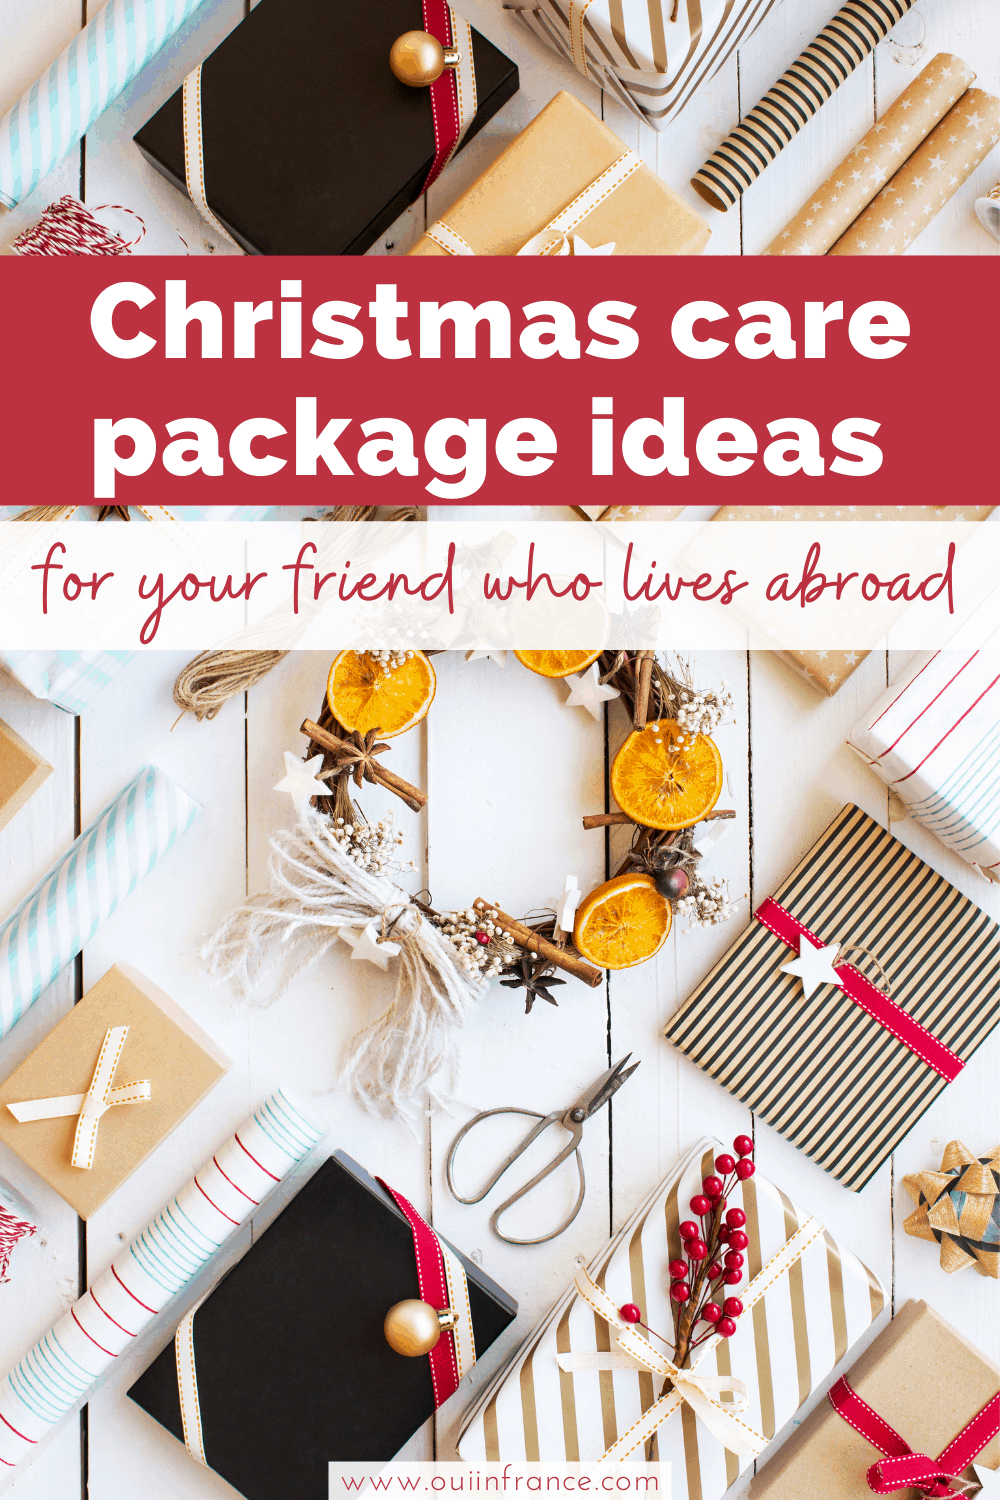 Christmas care package ideas